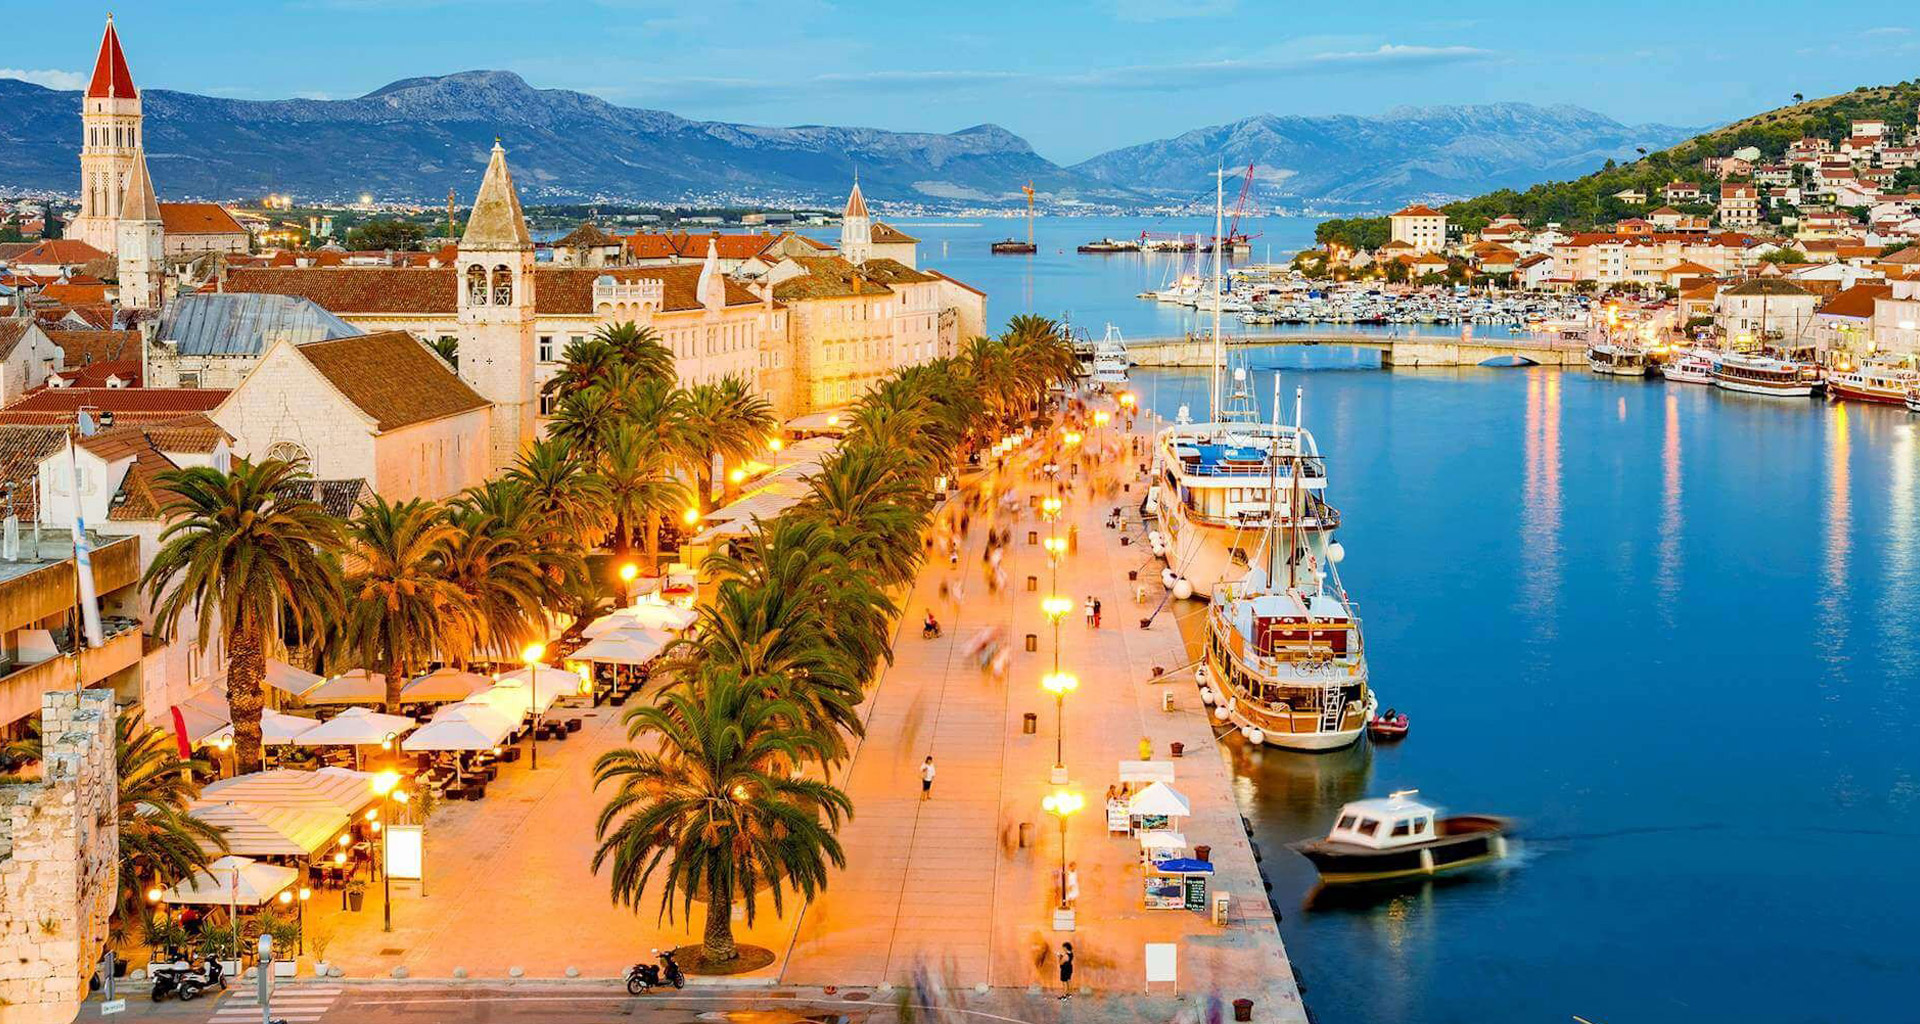 Things To Do In Trogir - Taxi Cavtat